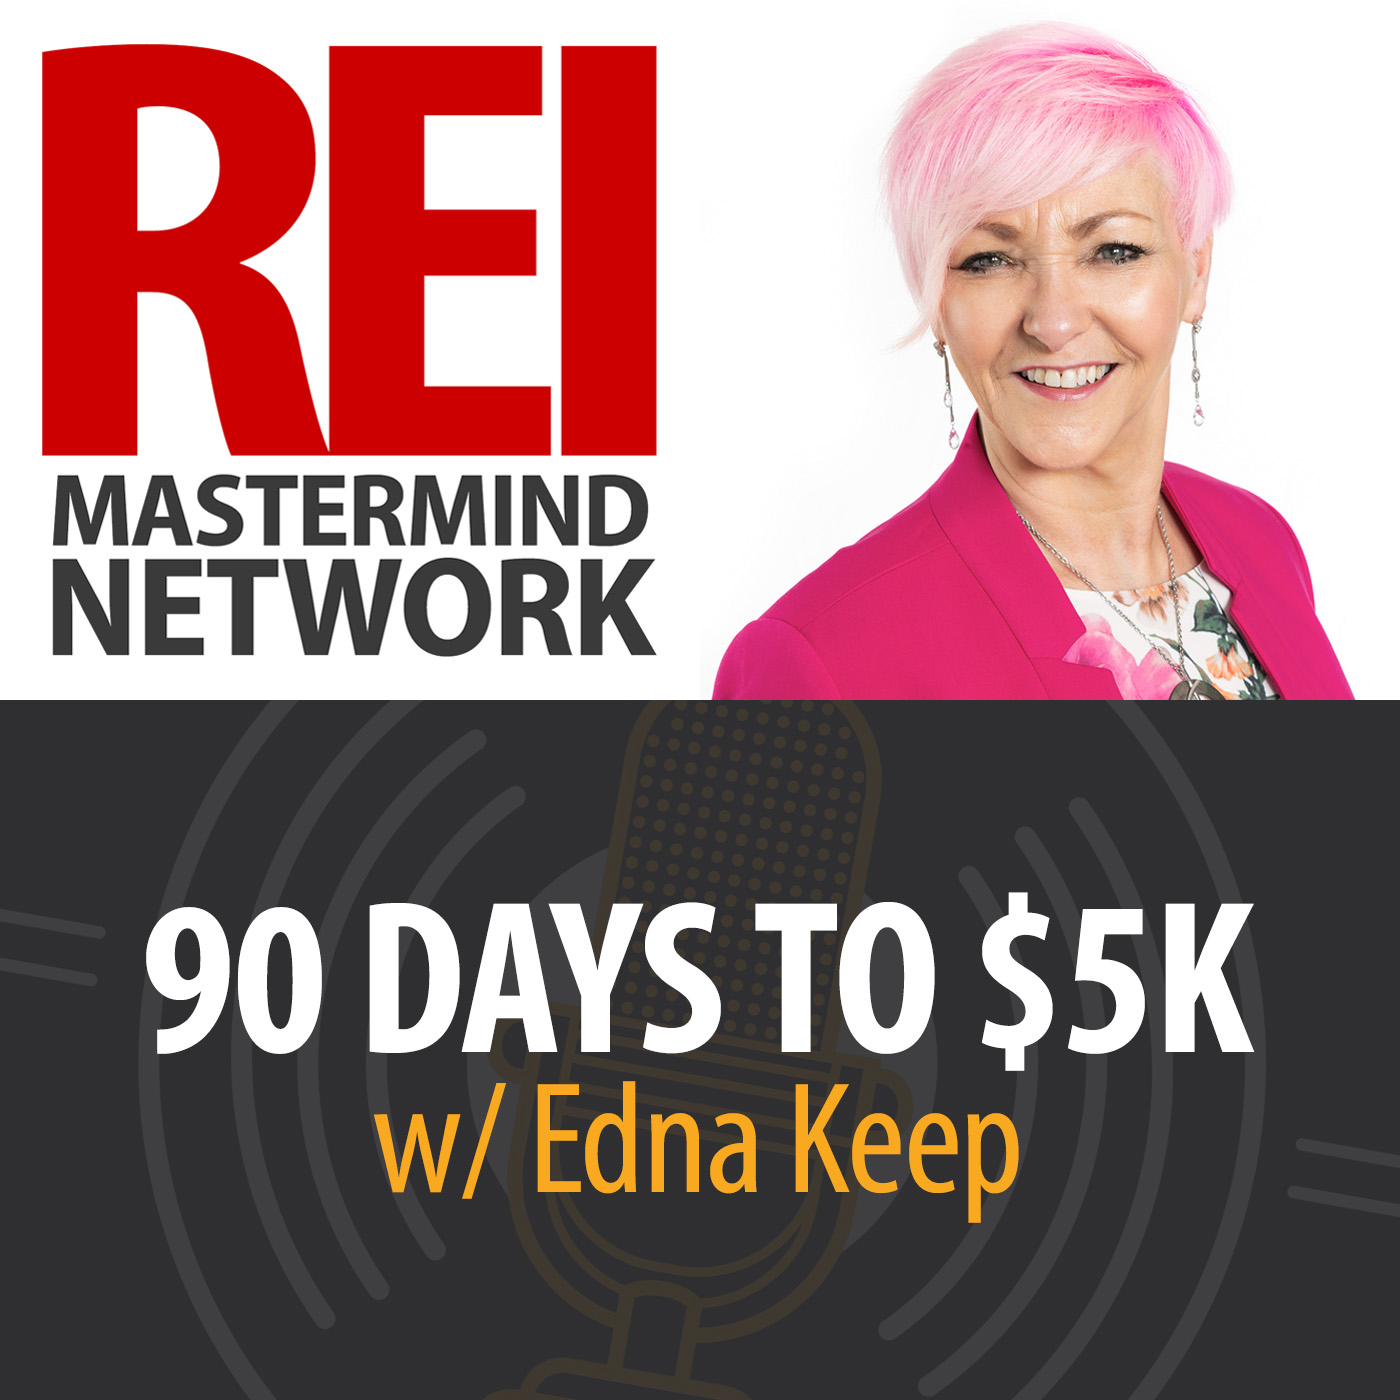 90 Days to $5k with Edna Keep